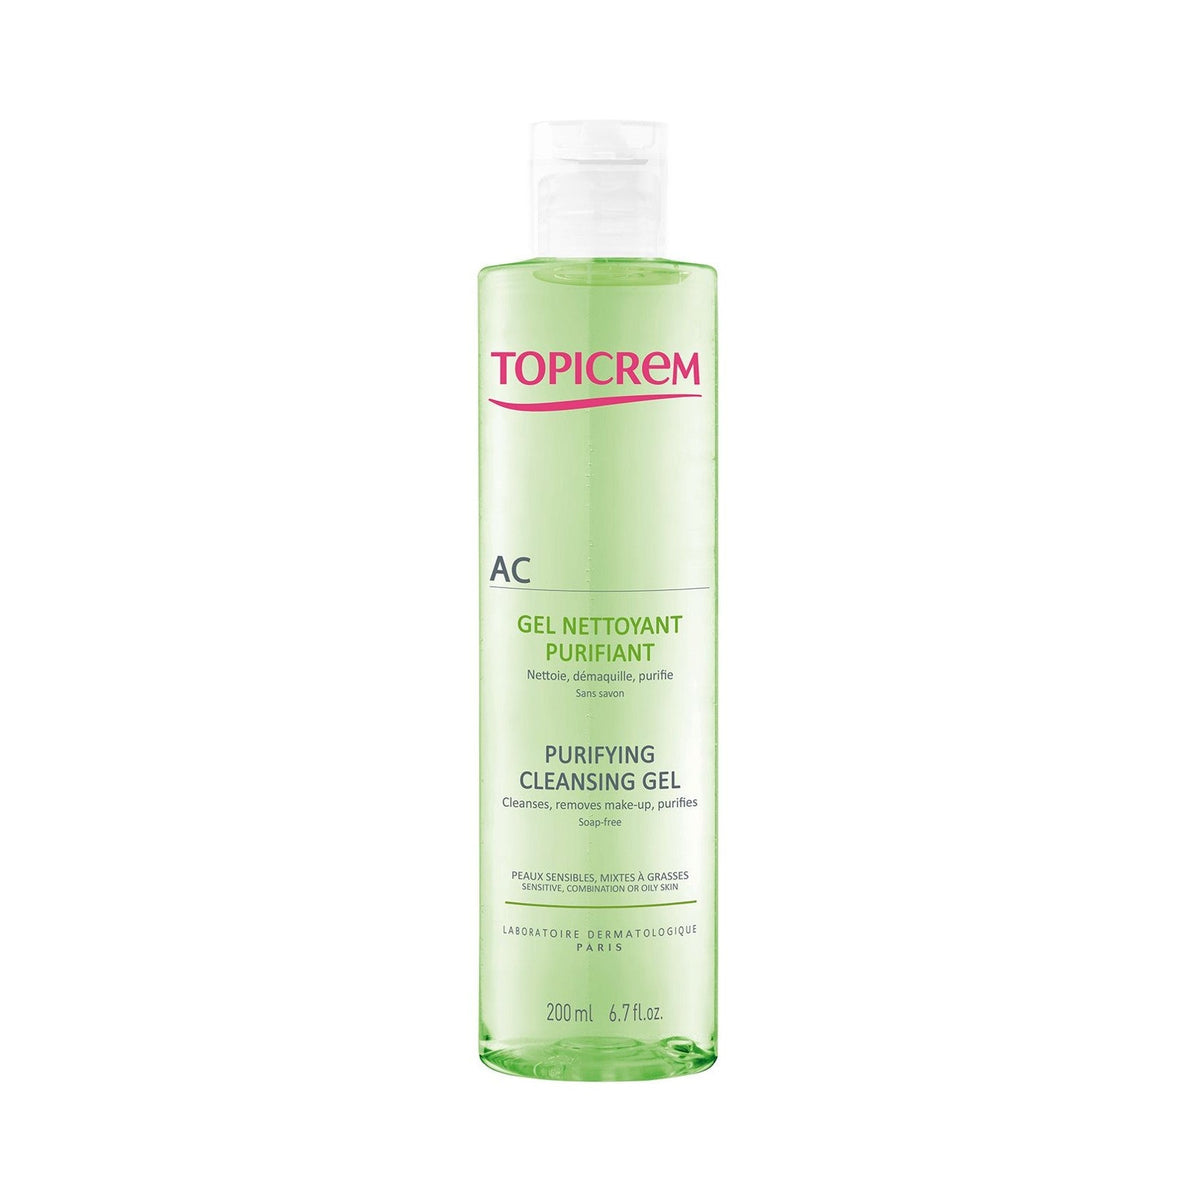 Topicrem AC Purifying Cleansing Gel 200ml | Goods Department Store